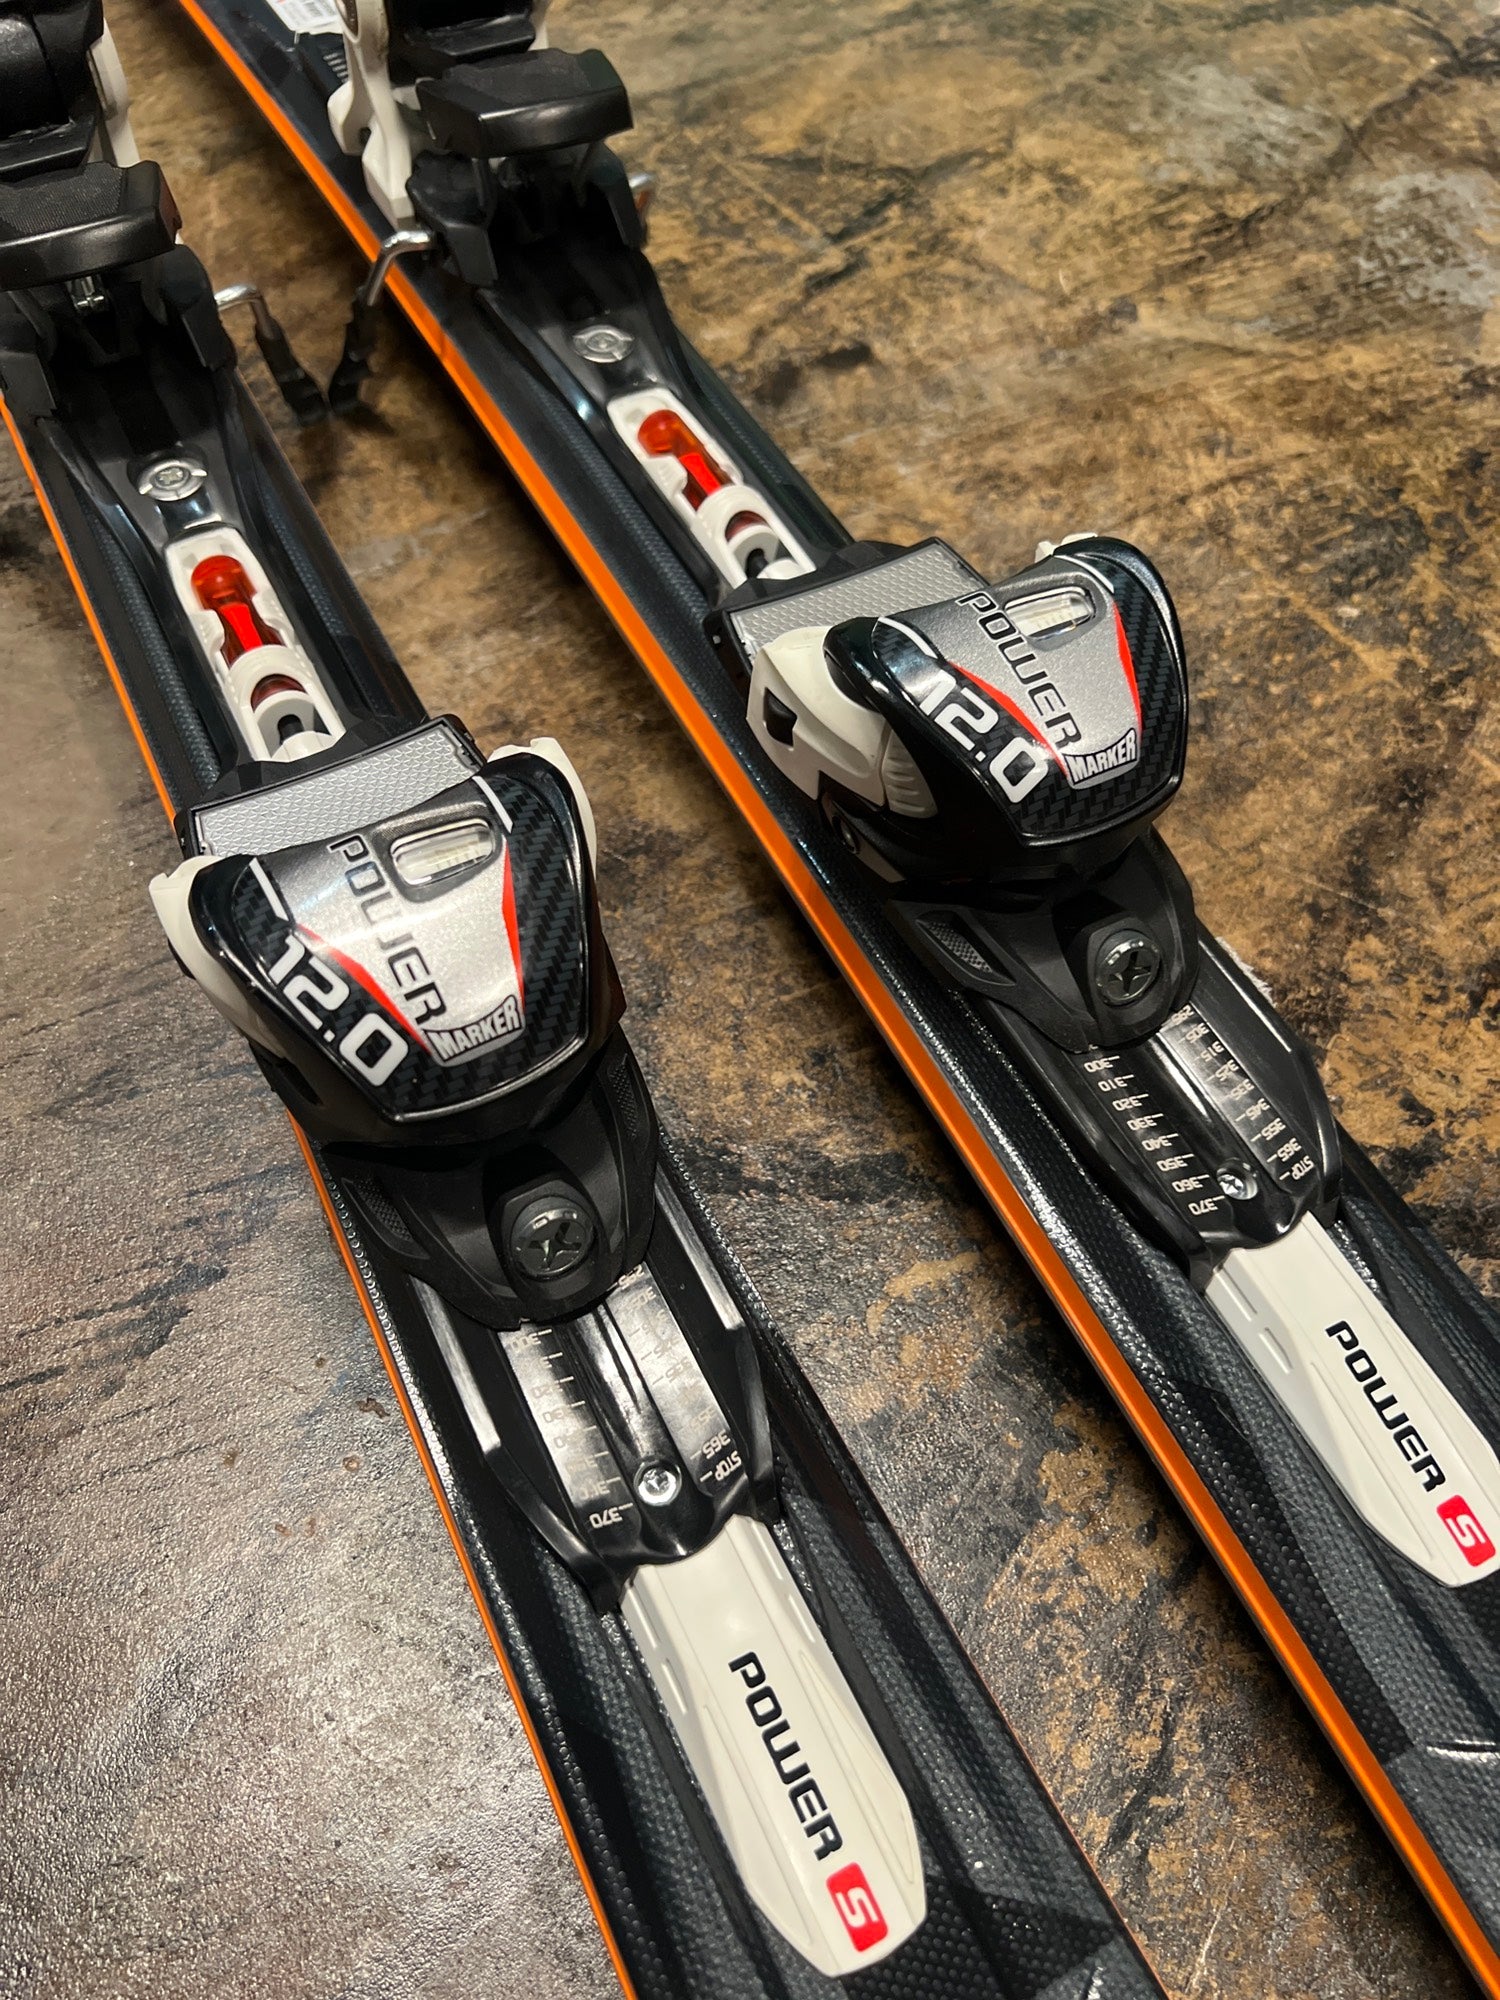 Used 160cm Blizzard Power 800S Skis with Bindings | SidelineSwap